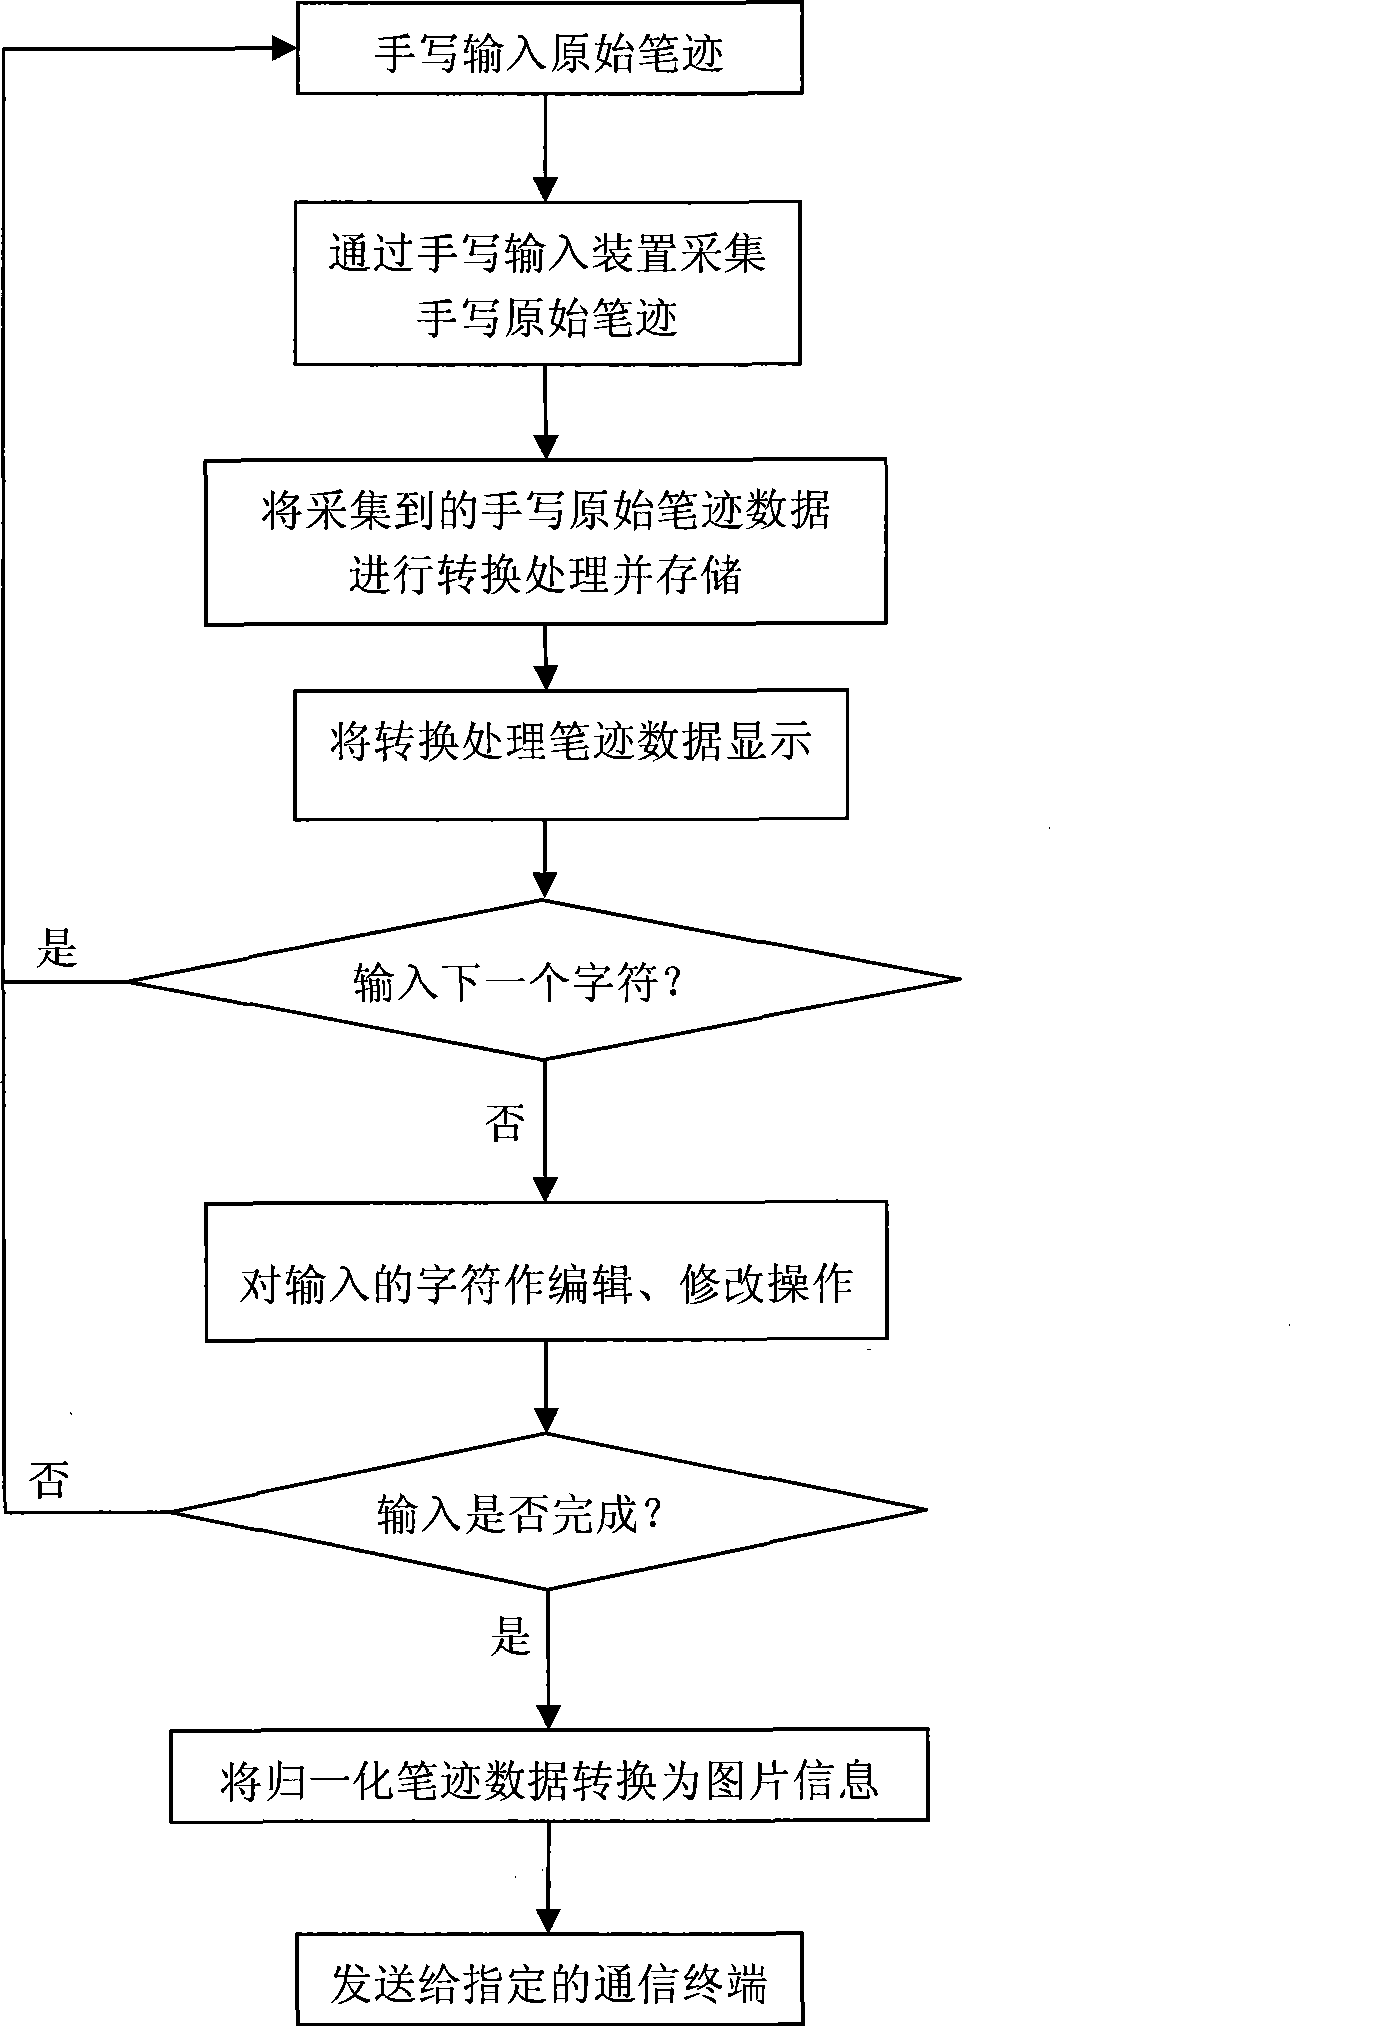 Handwriting processing method and system used for information processing terminal